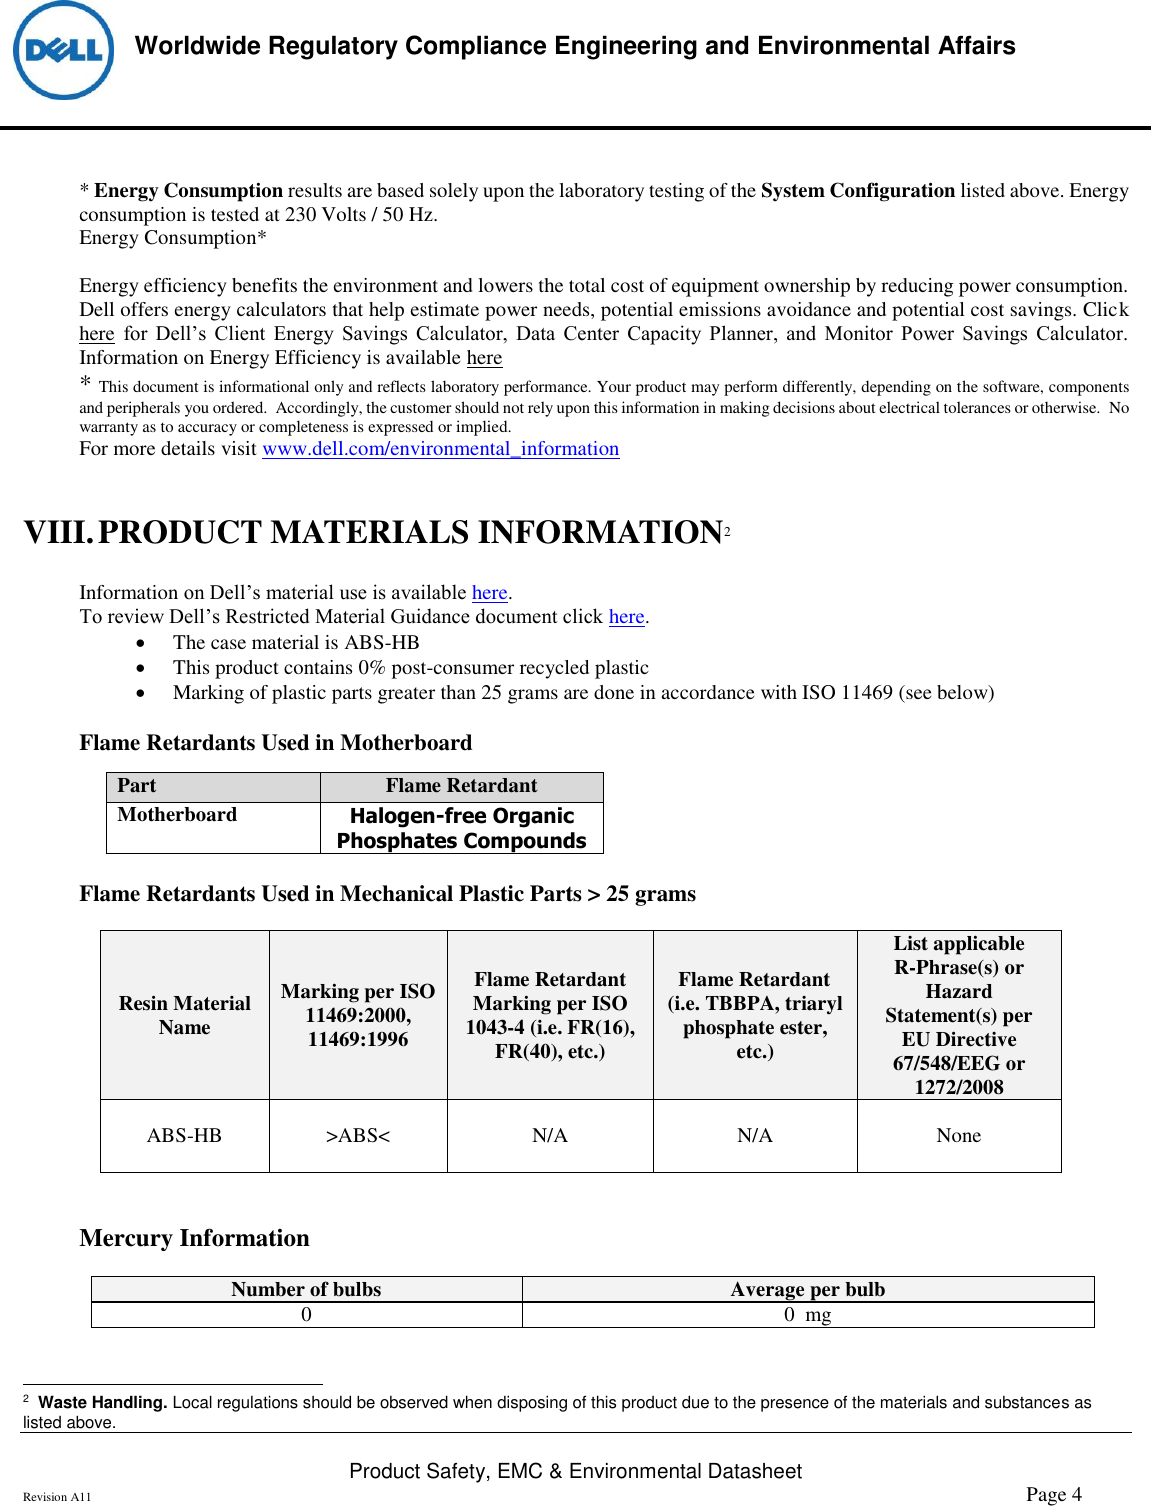 Page 4 of 6 - Dell Dell-p3418hw-monitor Product Safety, EMC And Environmental Datasheet User Manual  - Regulatory Monitor P3418hw,p3418hwf,n A,dell